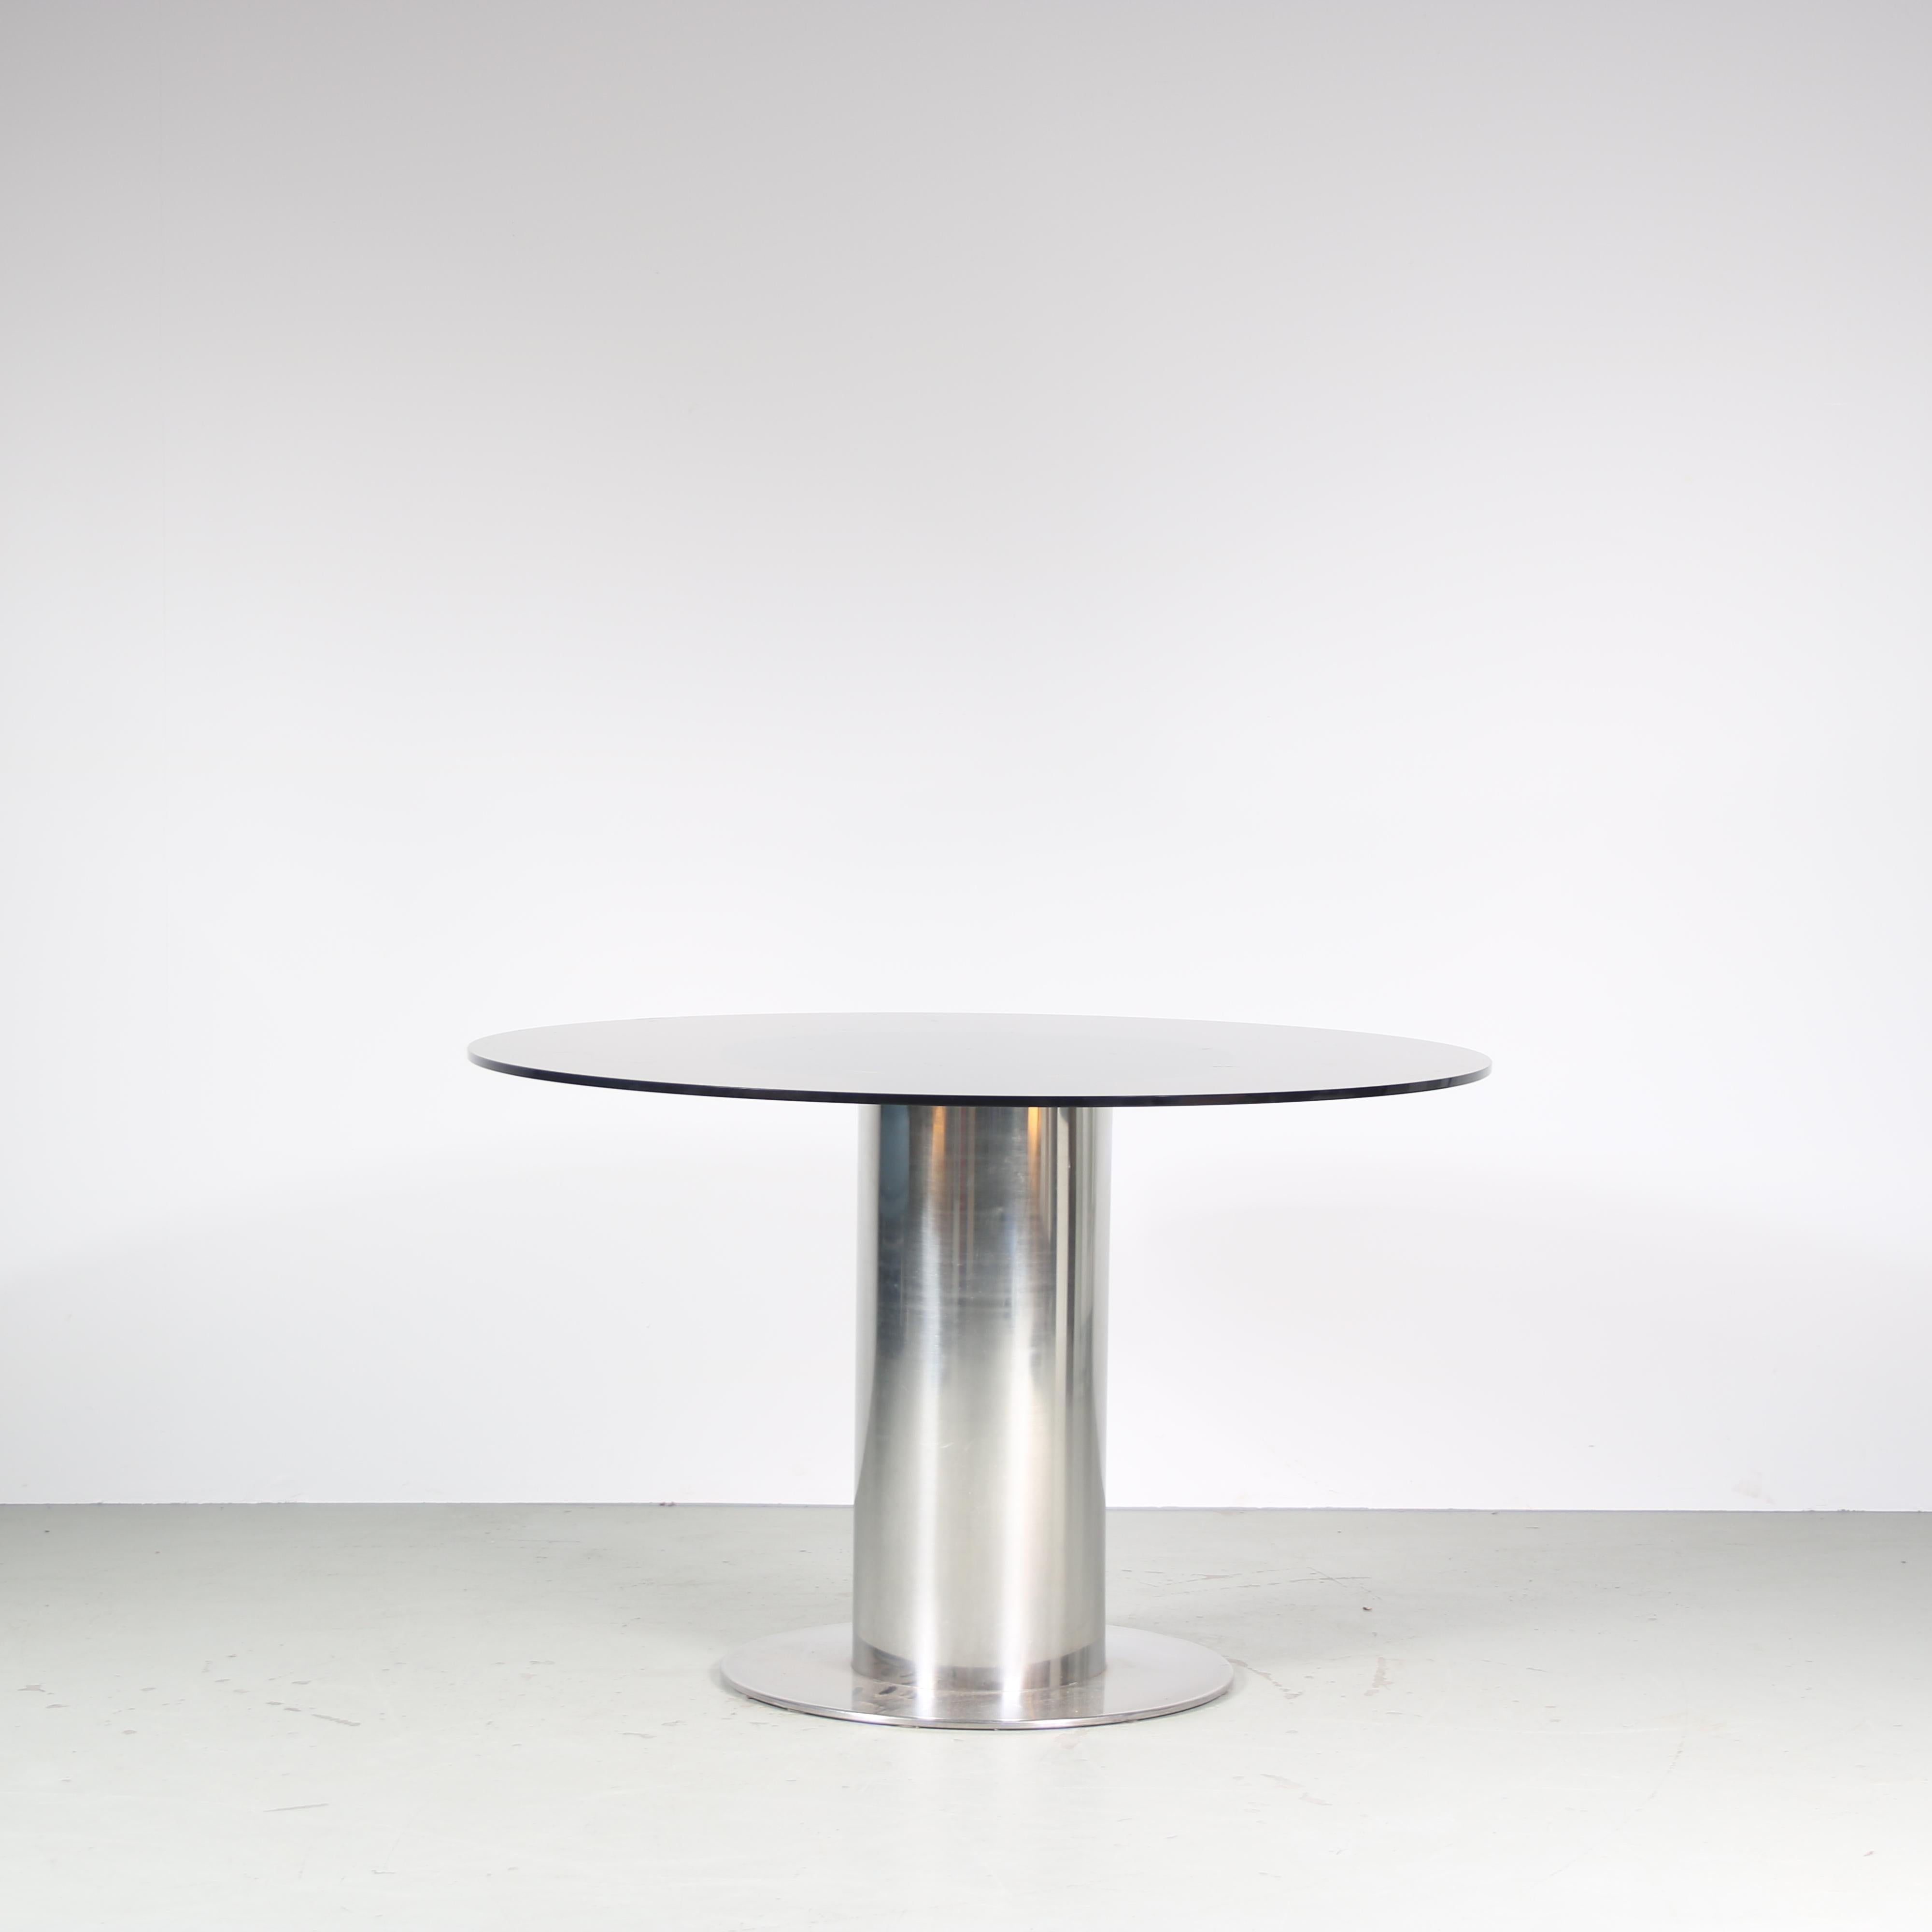 An eye-catching dining table, model “Cidonio”, designed by Antonia Astori, manufactured by Cidue in Italy around 1960.

This modern table is a true statement piece in the decor! It has a thick cylinder shaped, chrome plated metal base on a flat